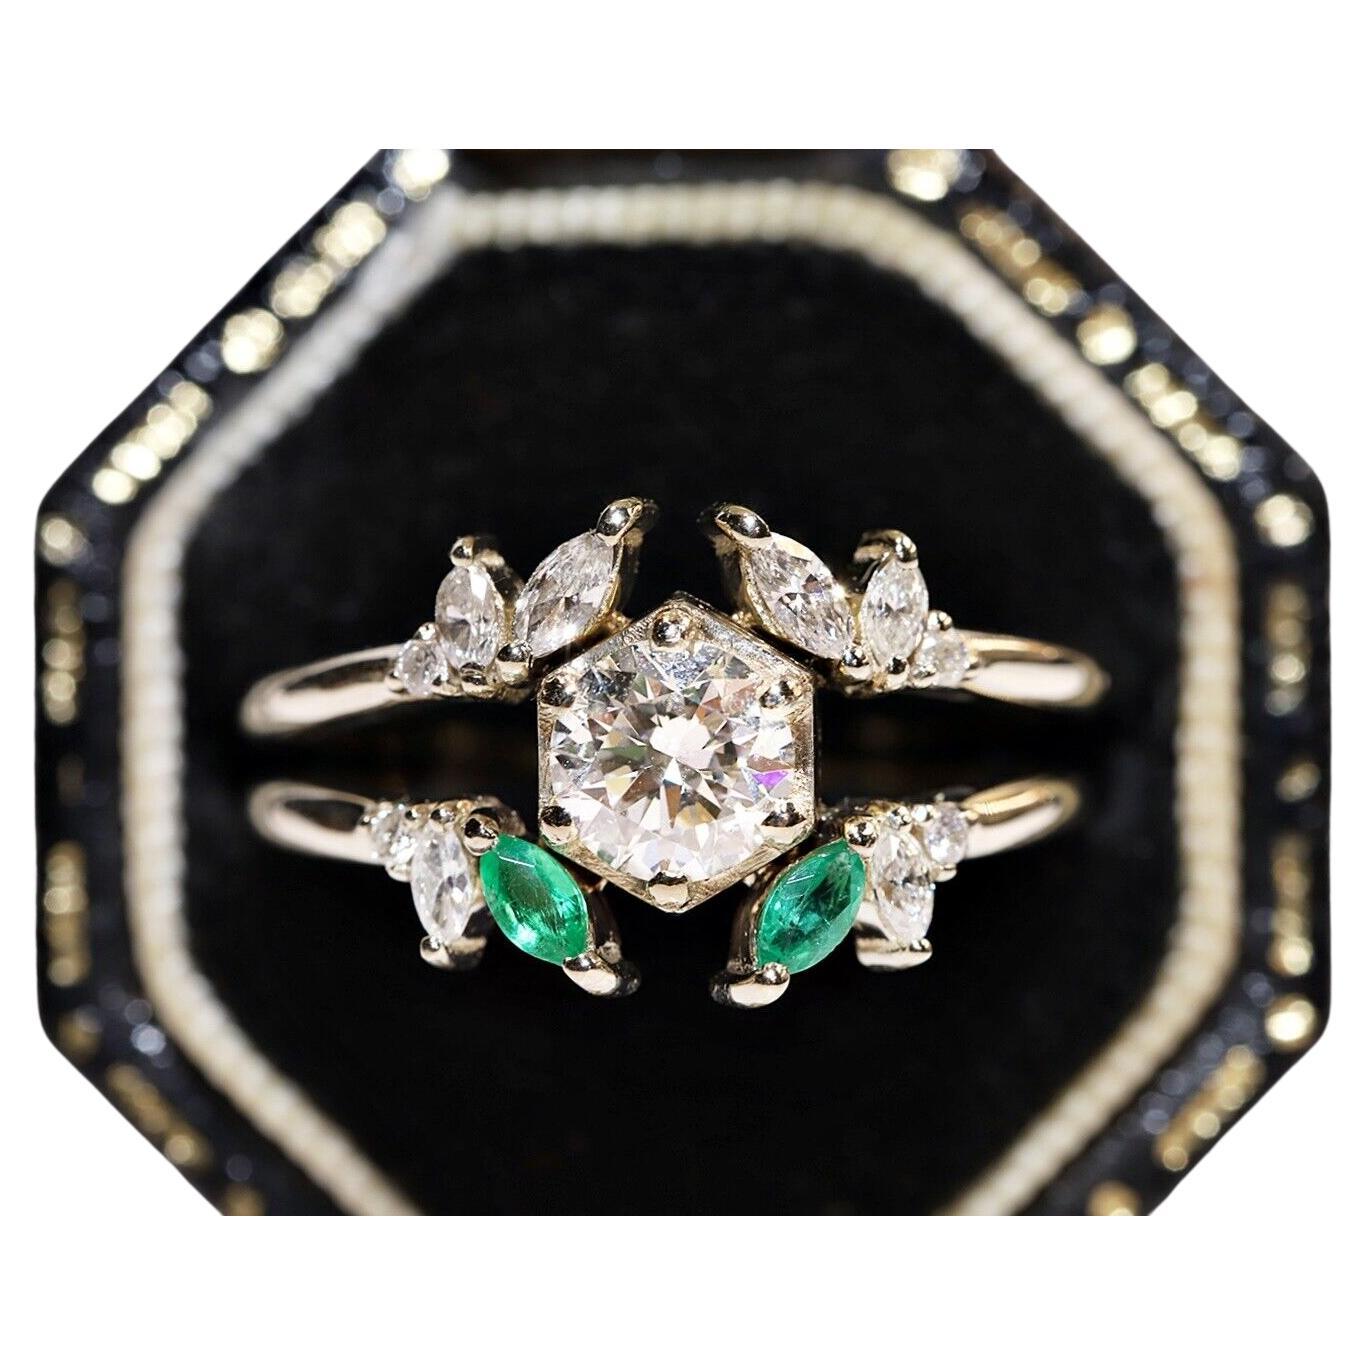 14k Gold Natural Diamond And Emerald Decorated Ring 